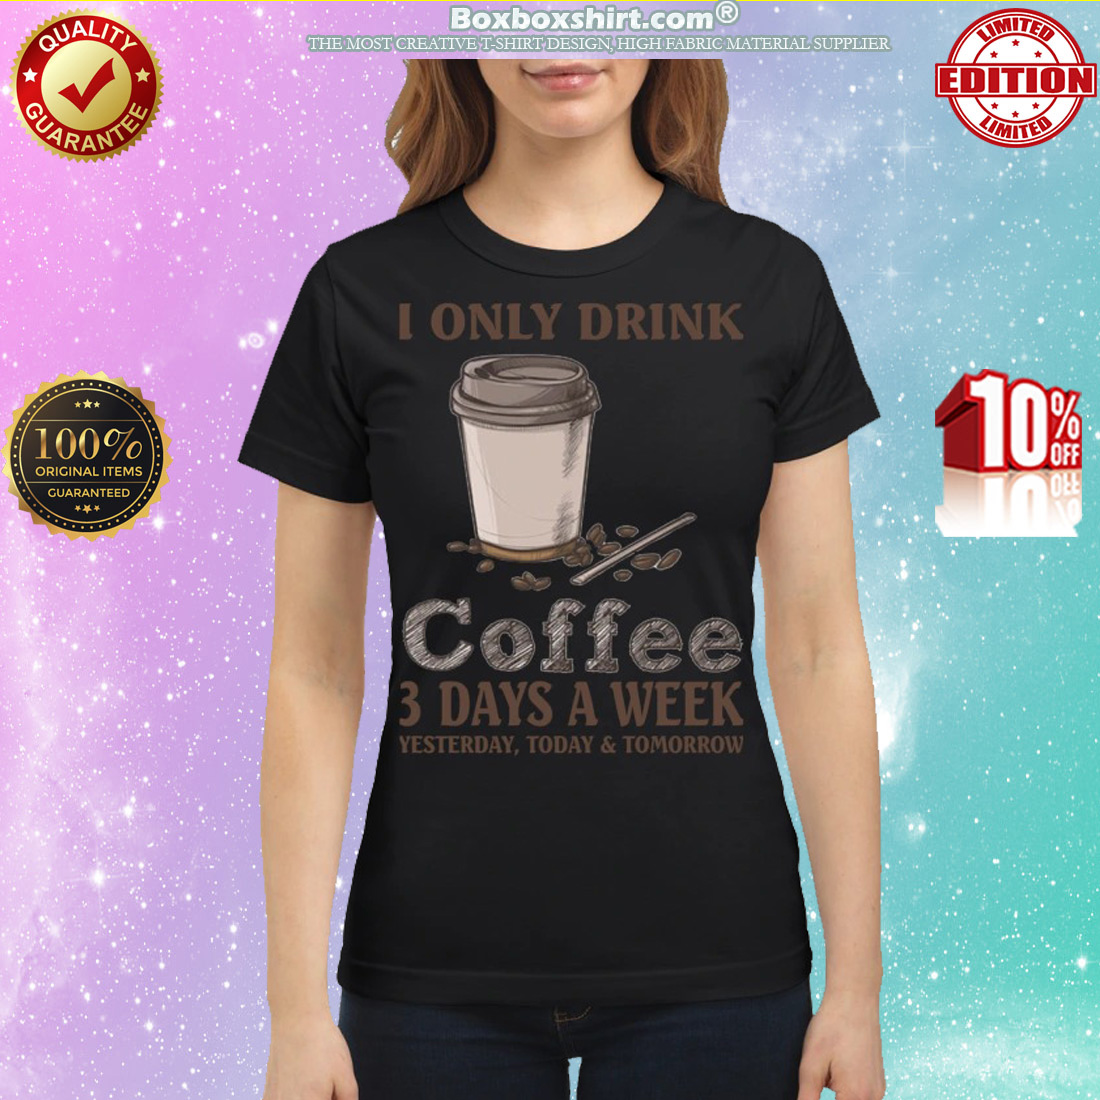 I only drink coffee 3 days a week yesterday today and tomorrow classic shirt